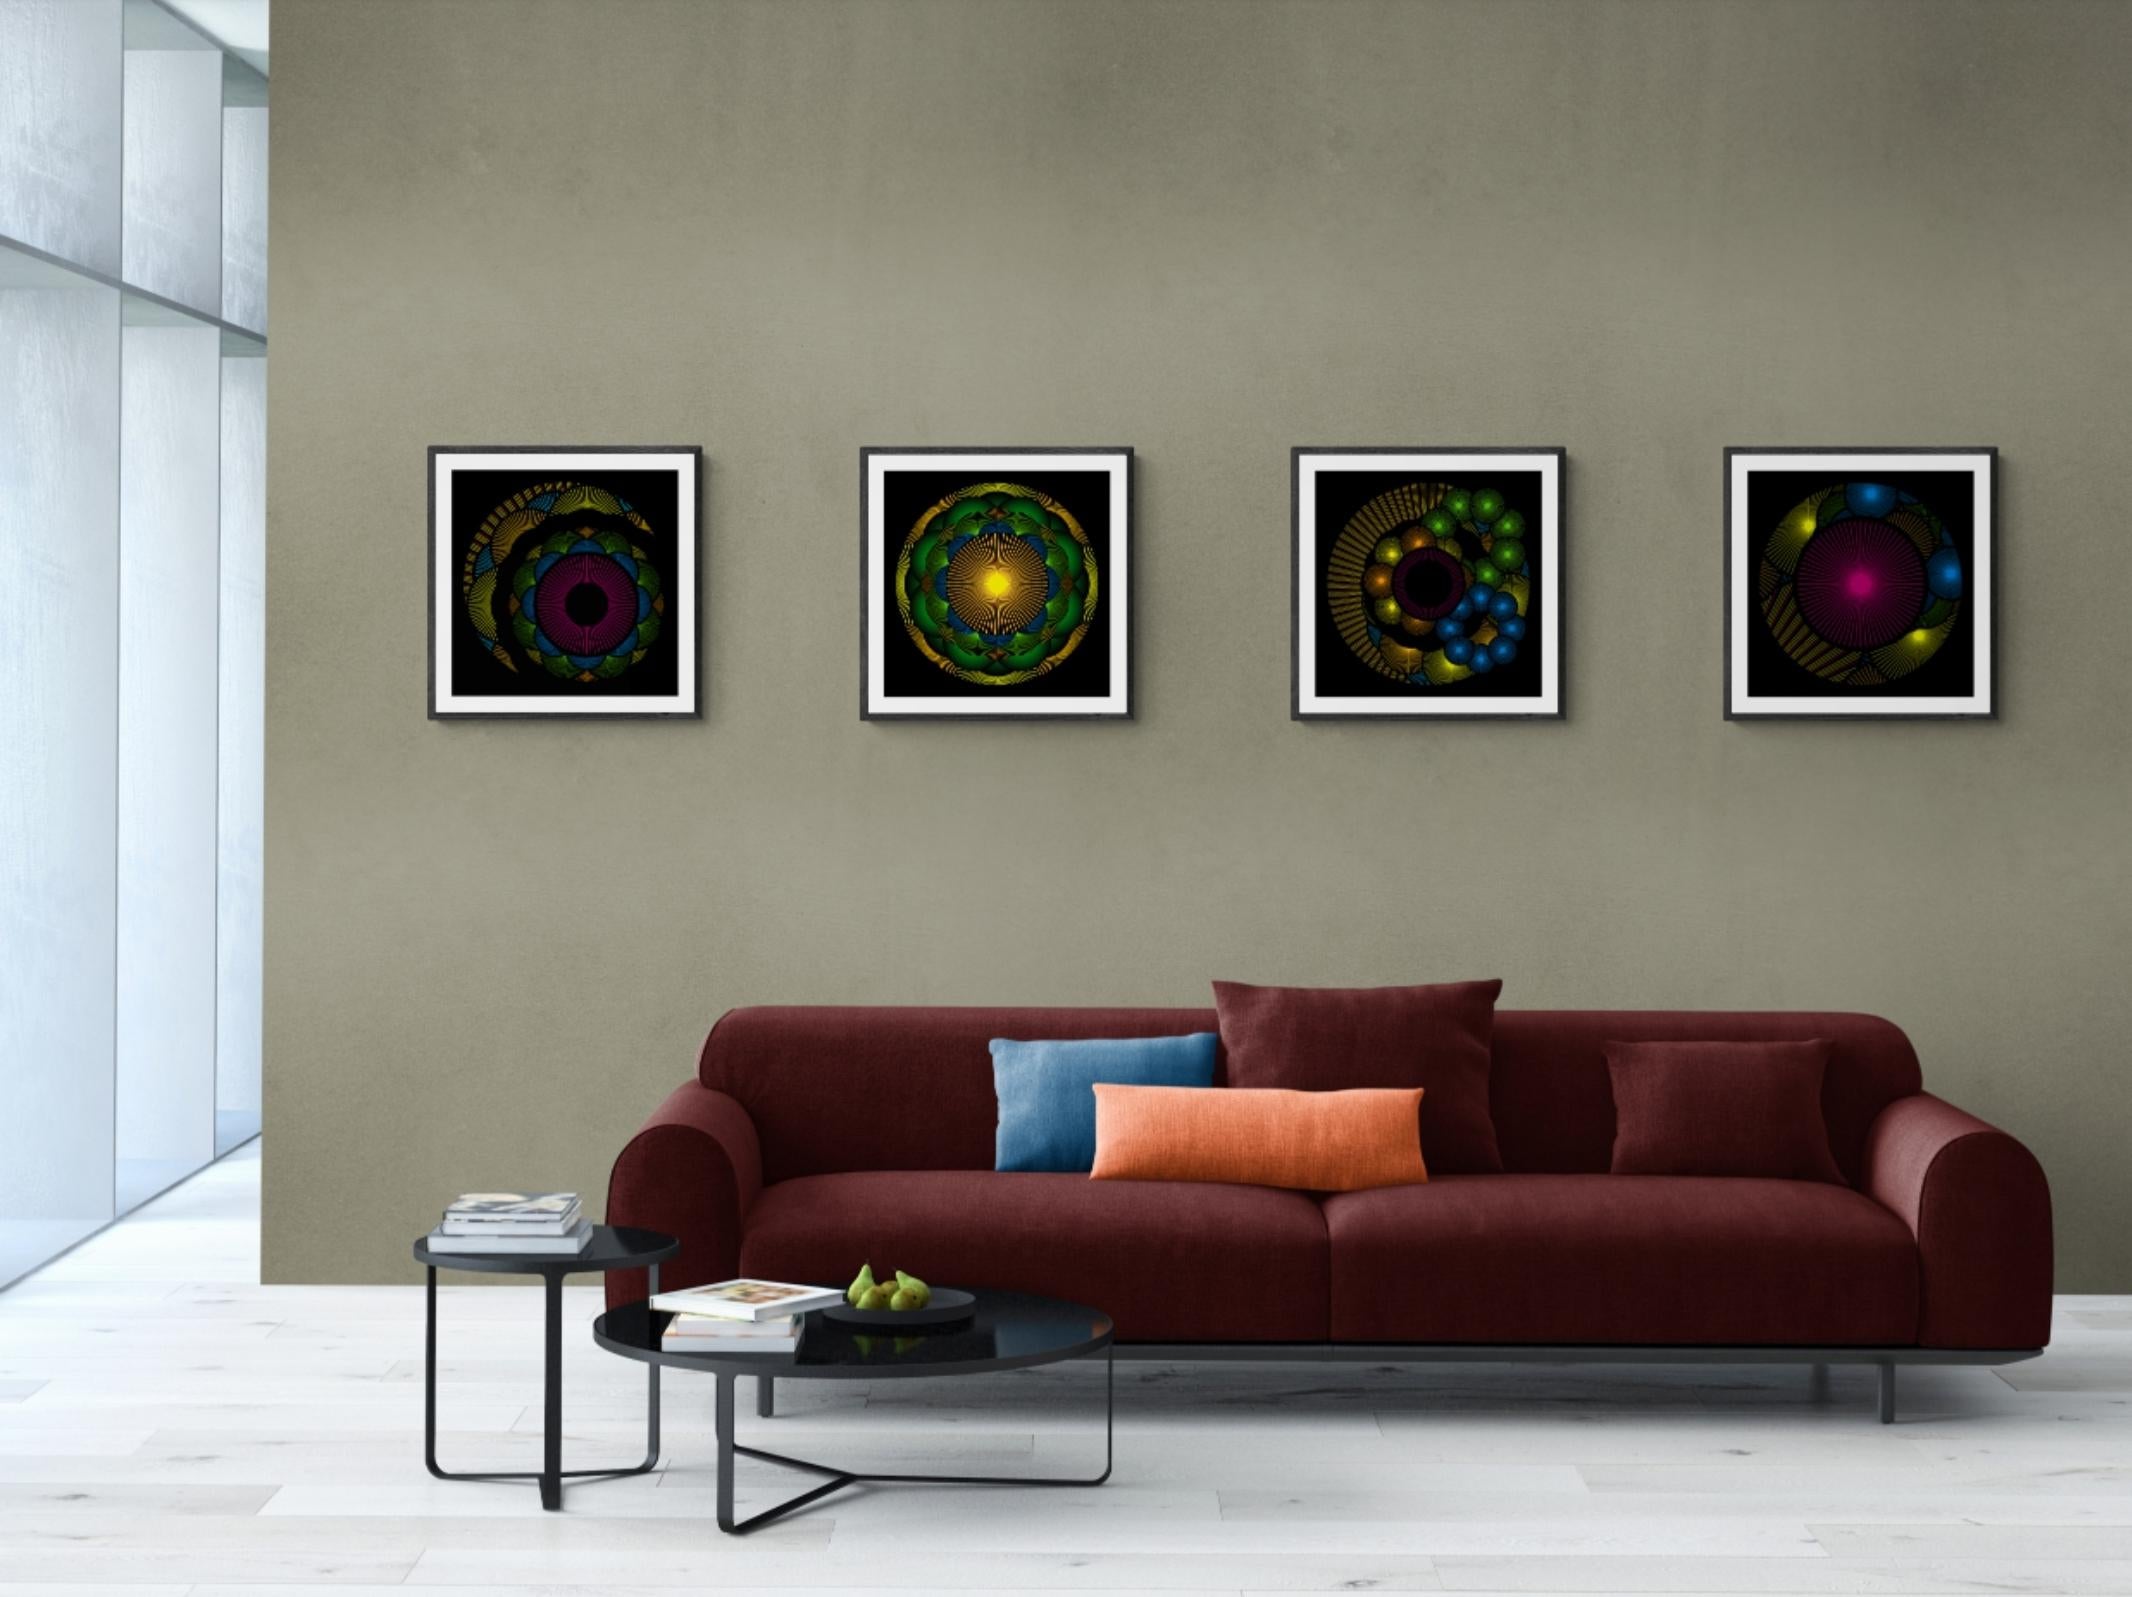 Nebulosa 25 - Abstract Geometric Print by Julio Campos